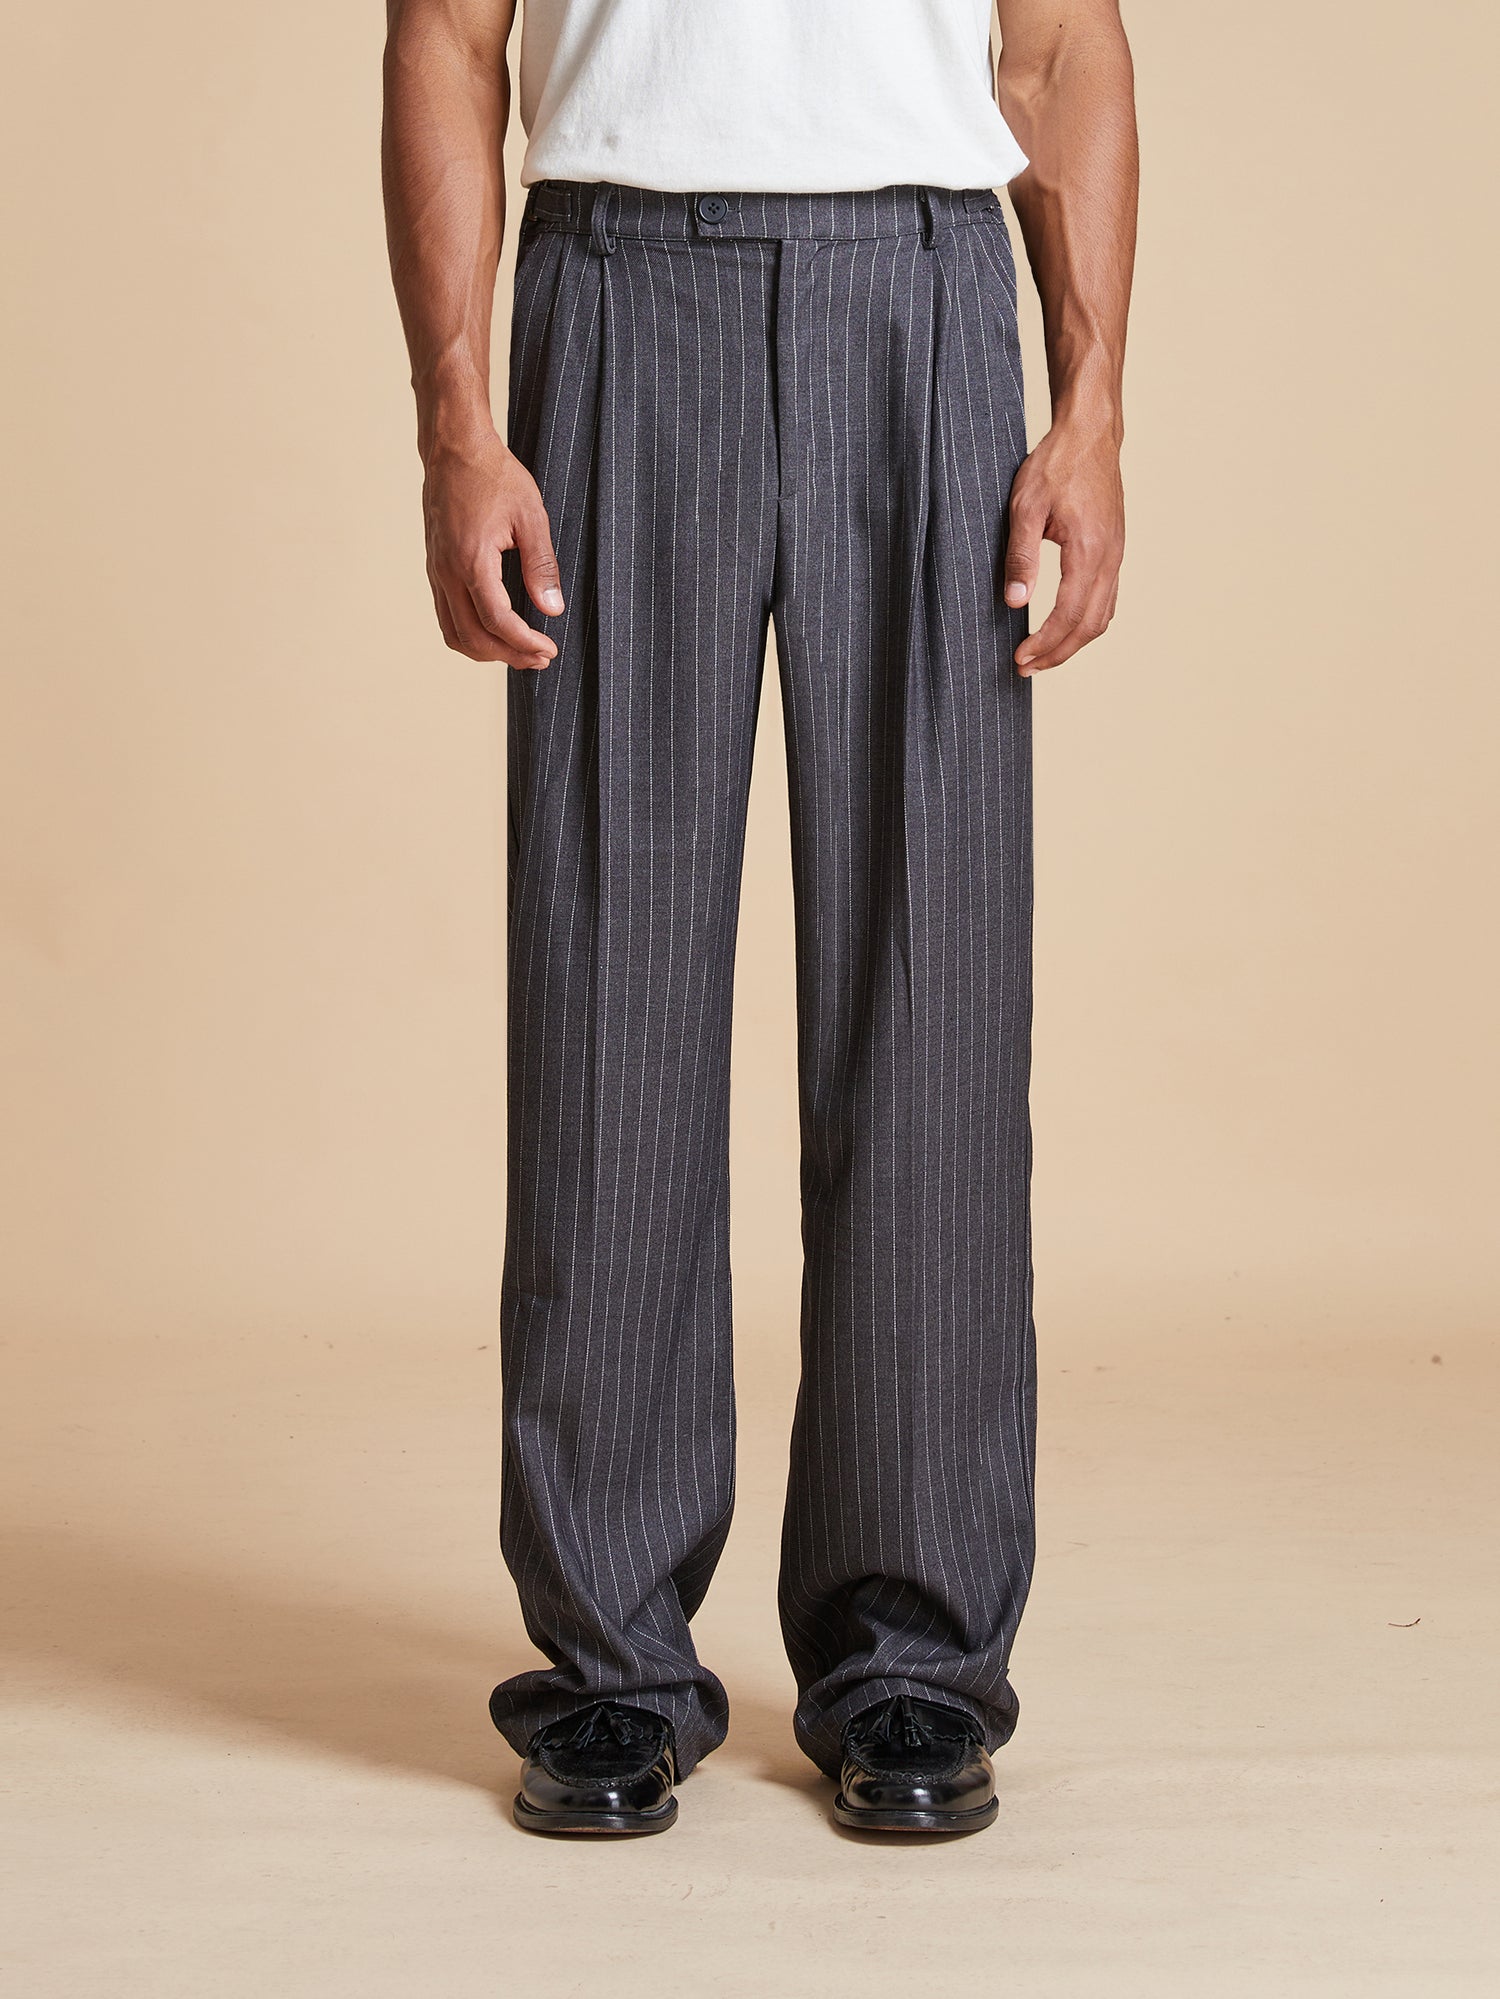 A man wearing Found Pinstripe Pleated Trousers and a white t-shirt.